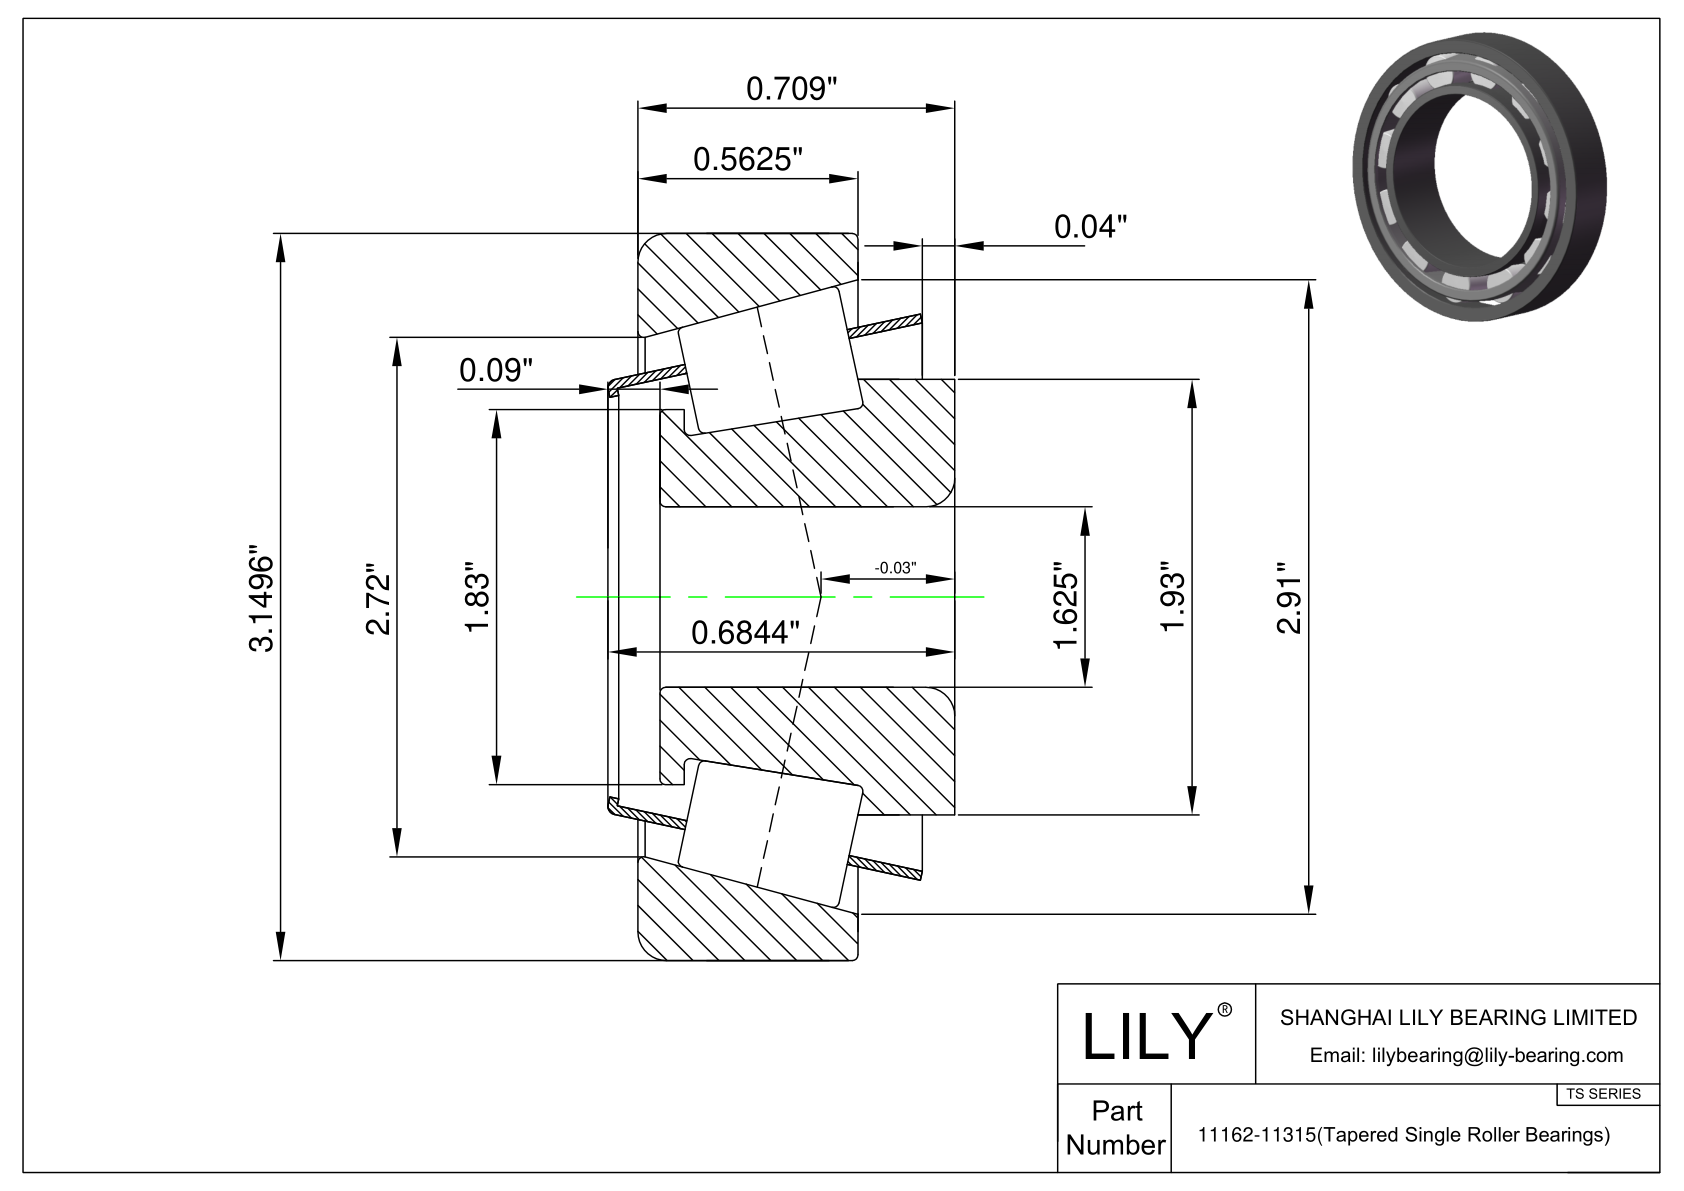 11162-11315 TS (Tapered Single Roller Bearings) (Imperial) cad drawing